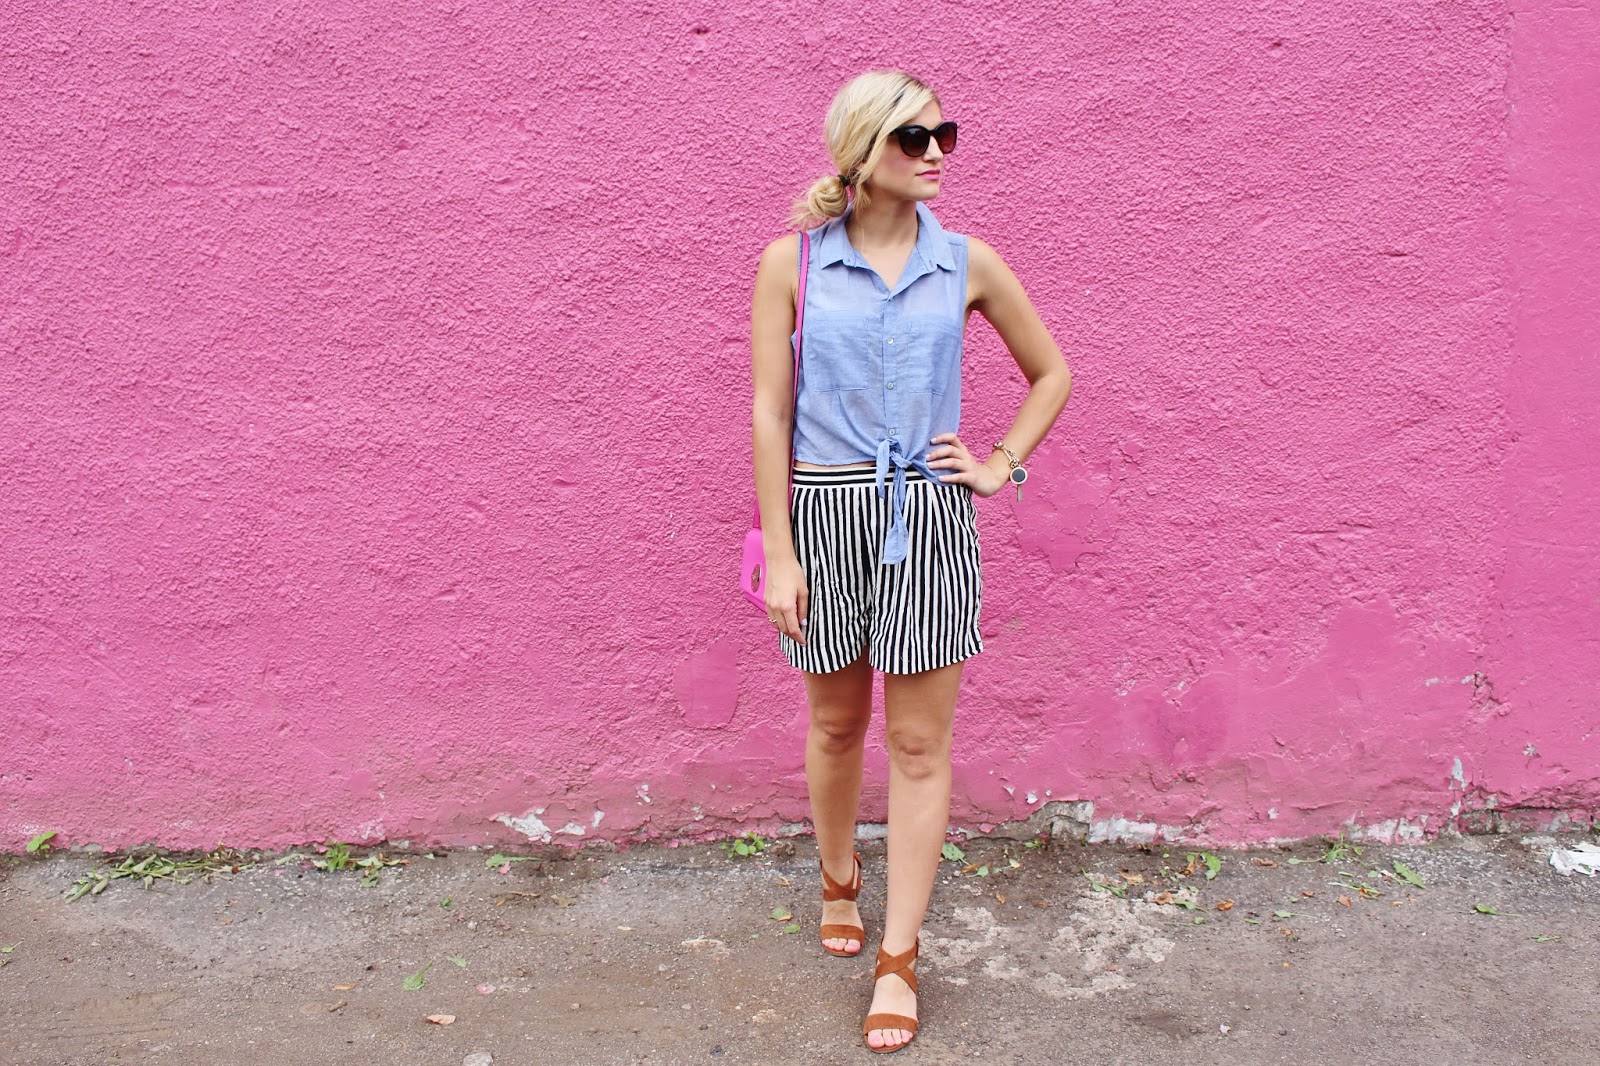 bijuleni- short shorts and cropped tie top, Kate Spade purse